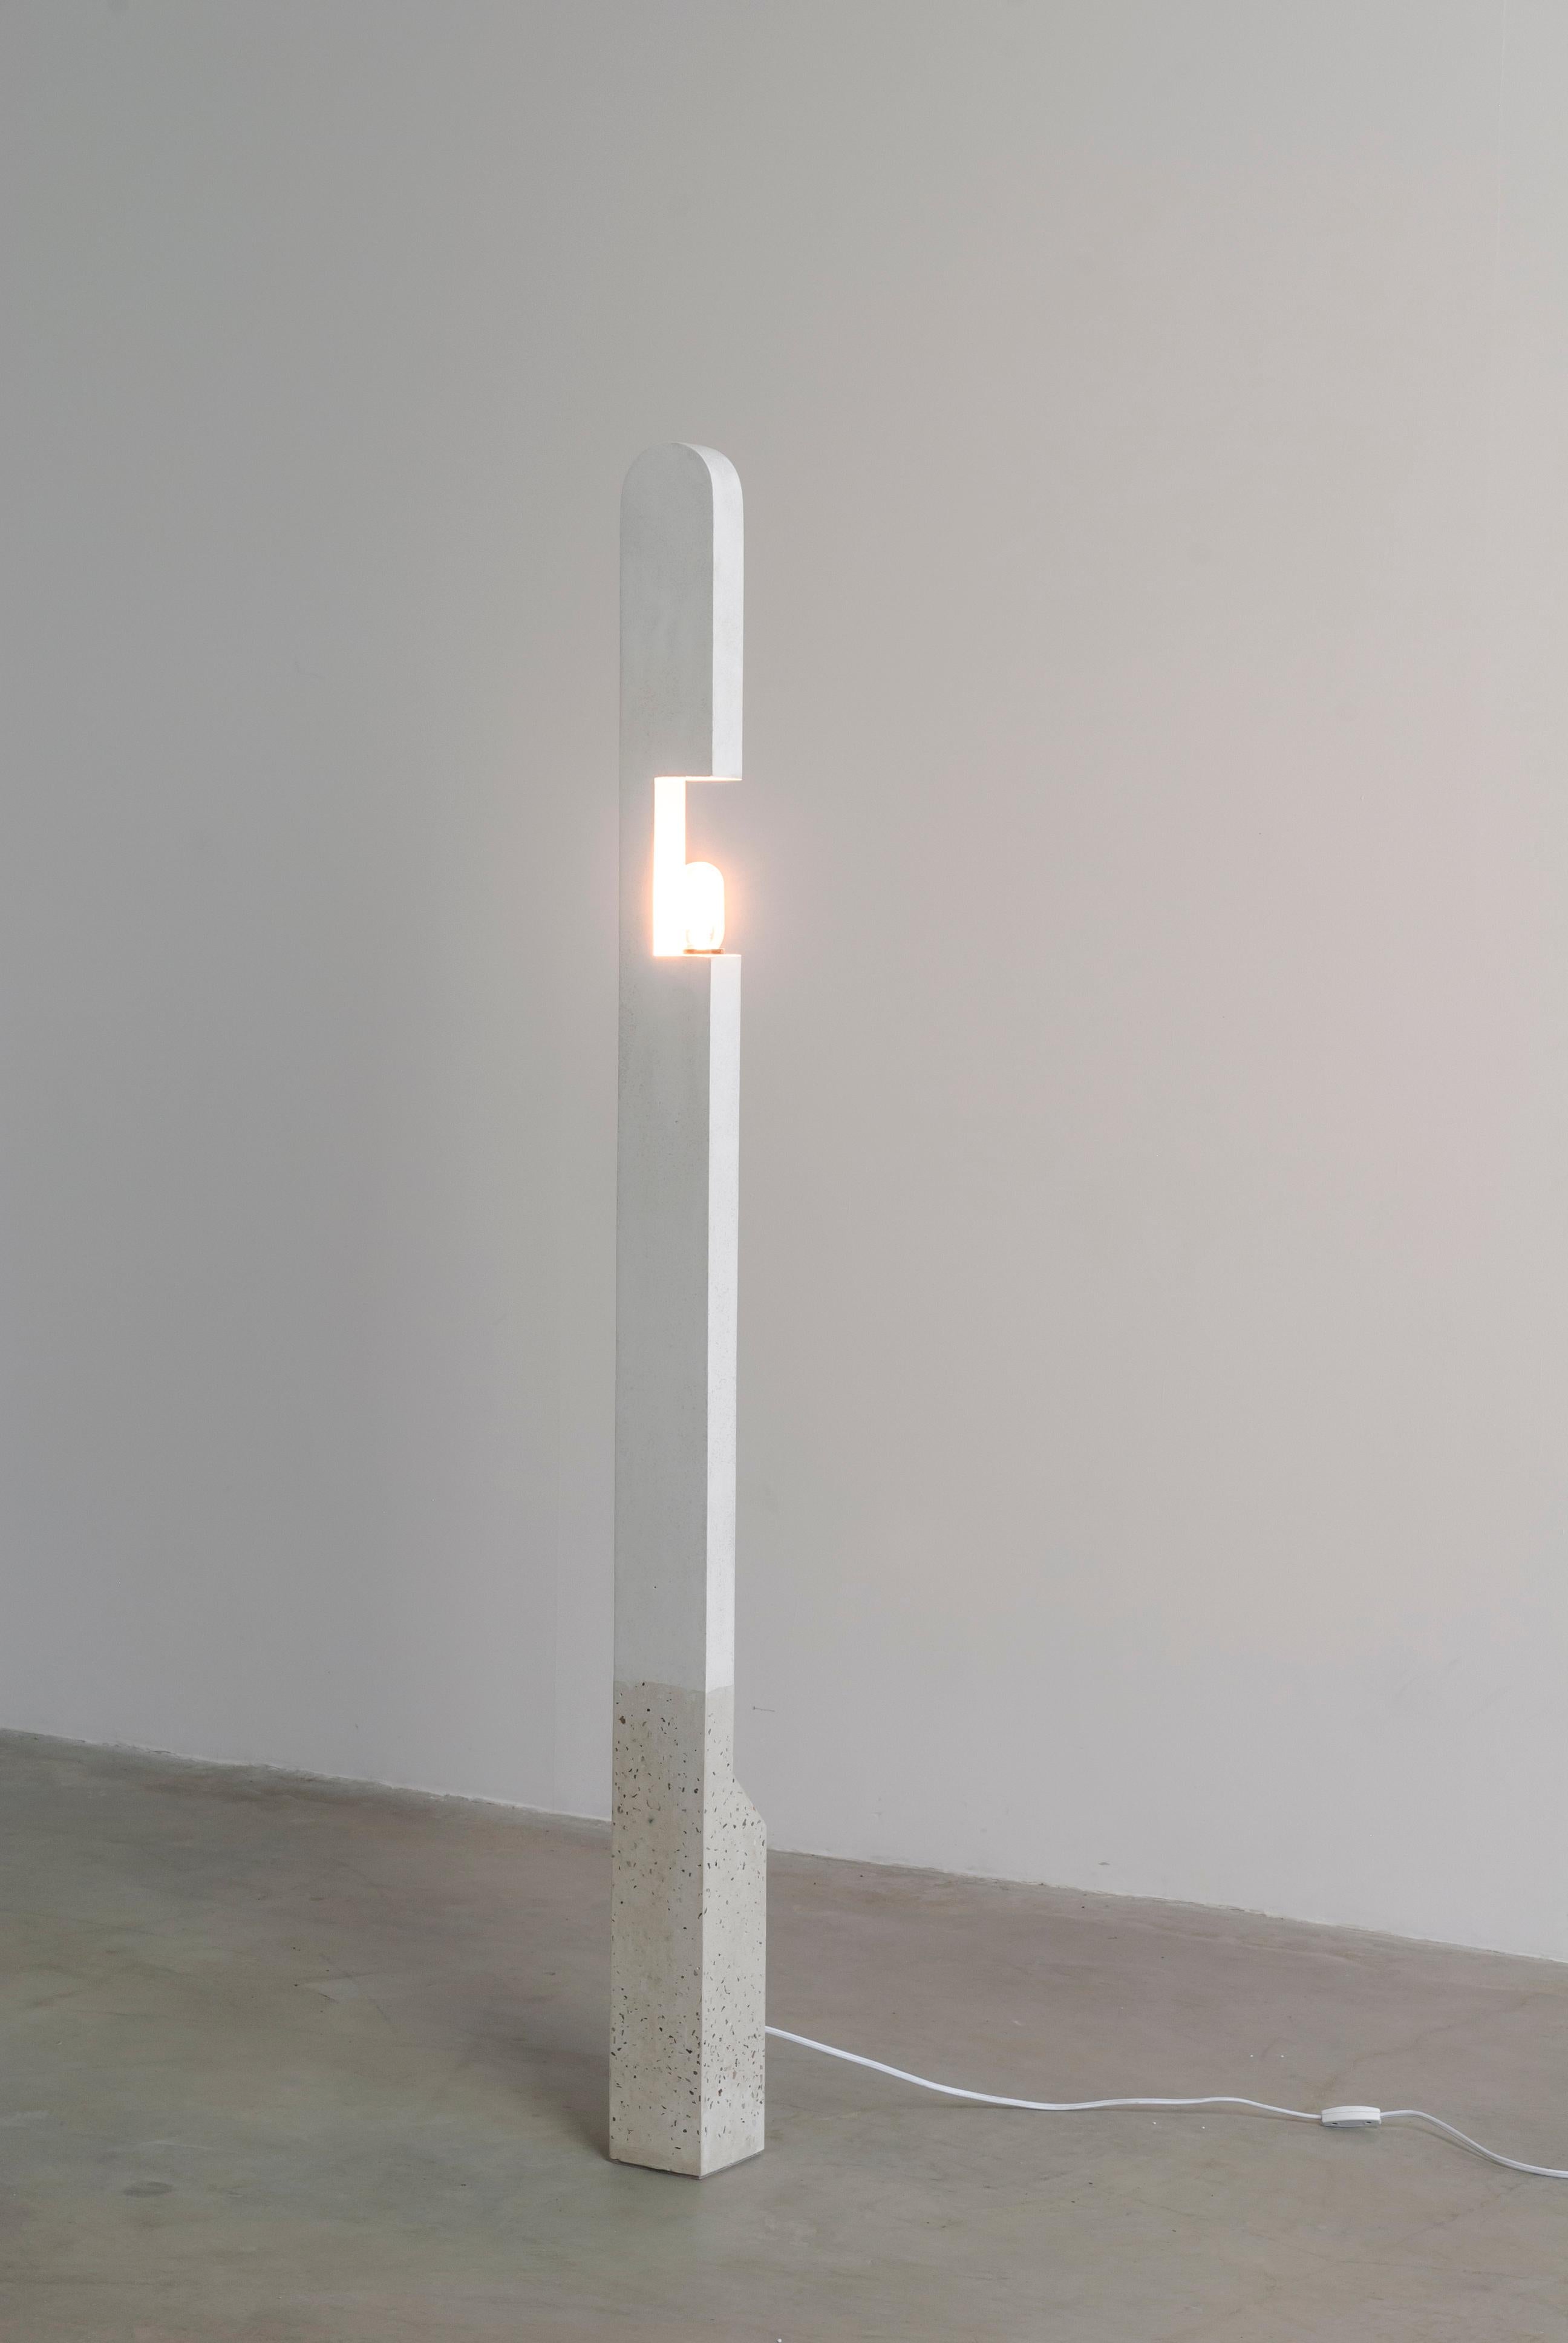 American Pillar Concrete Floor Lamp by Bailey Fontaine, Represented by Tuleste Factory